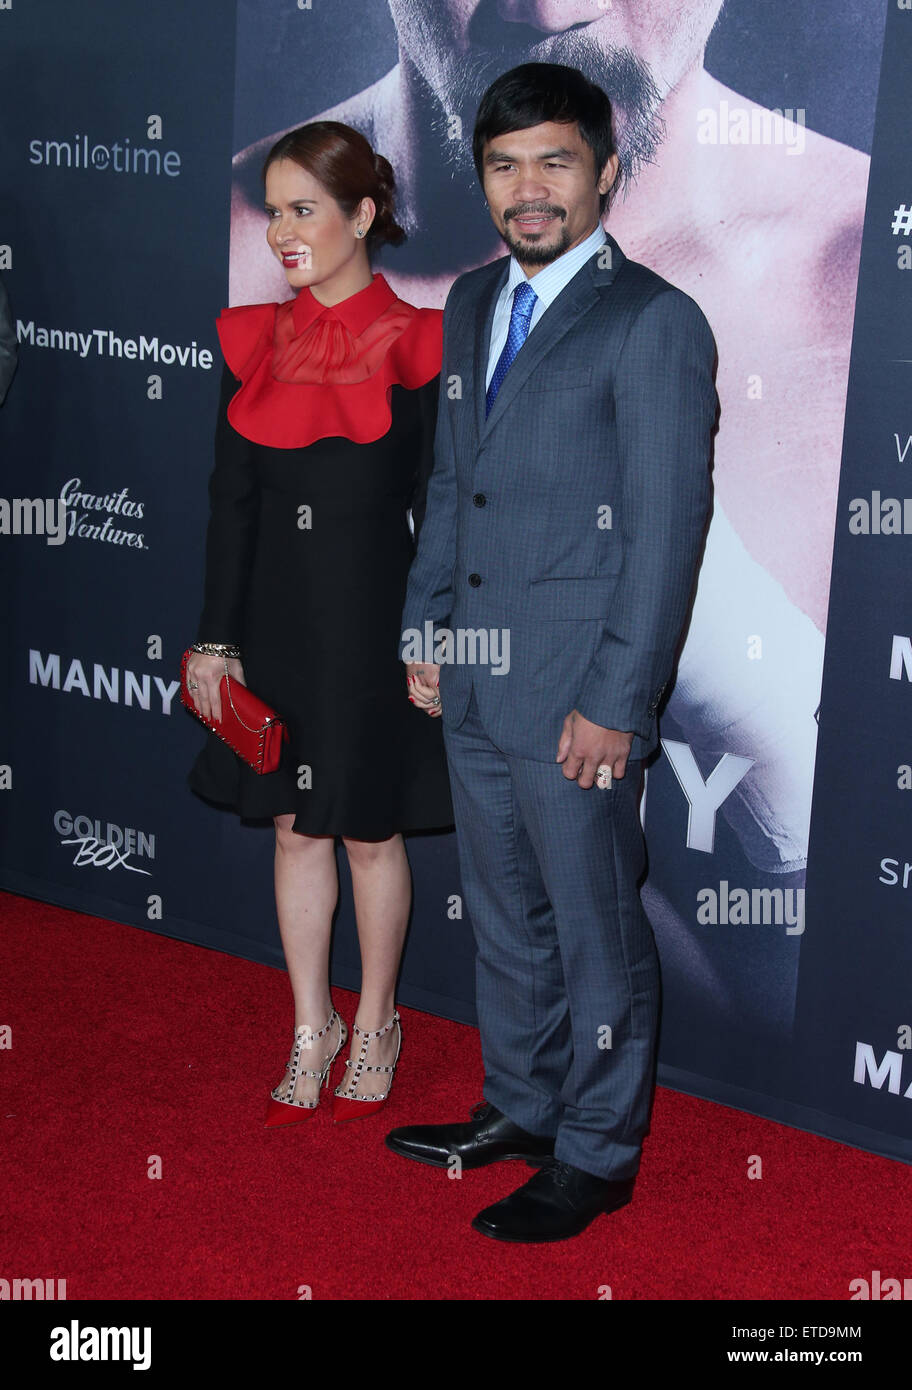 Los Angeles Premiere Of Manny Featuring: Jinkee Pacquiao, Manny Pacquiao  Where: Hollywood, California, United States When: 22 Jan 2015 Credit:  FayesVision/WENN.com Stock Photo - Alamy